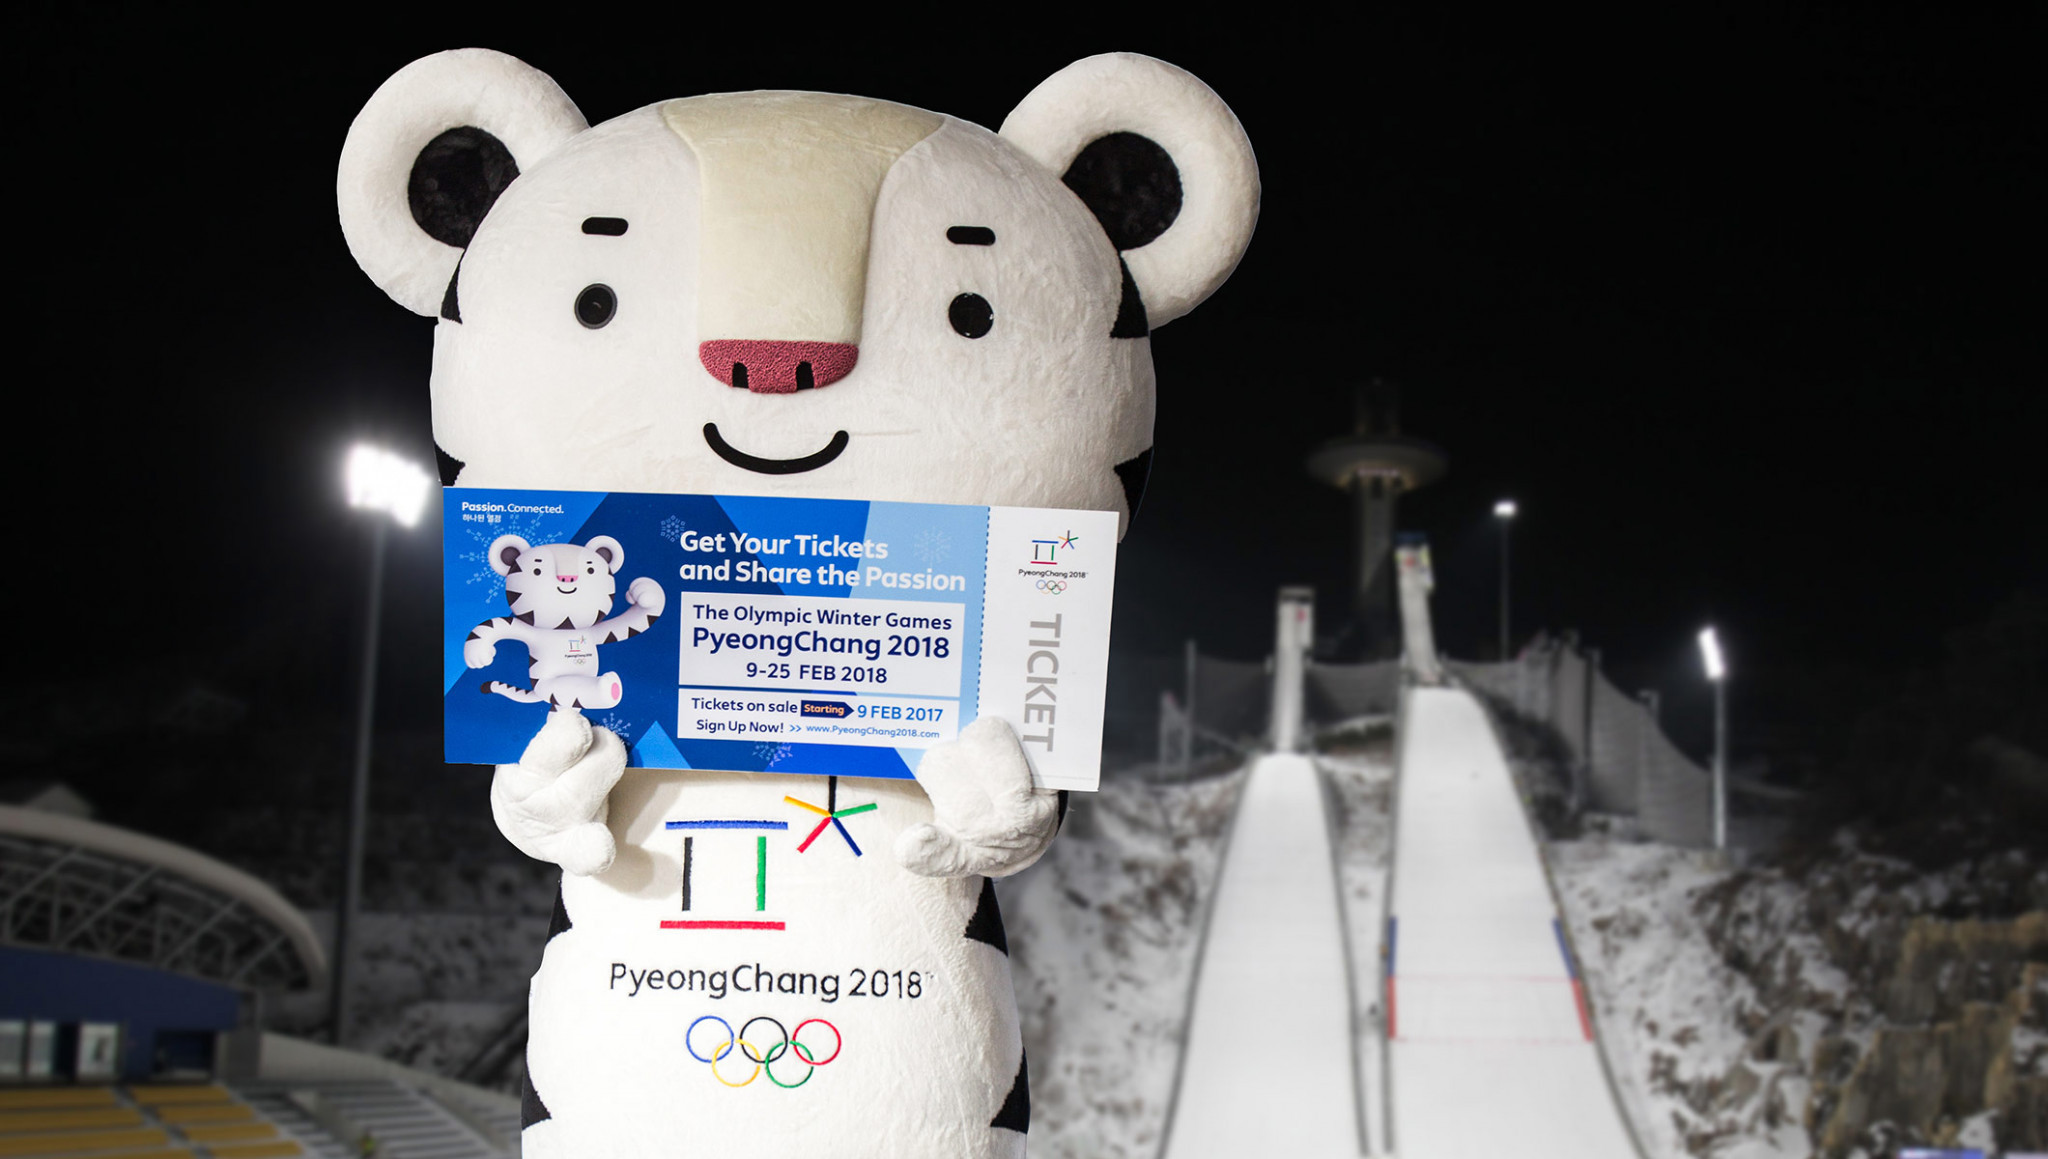 Ticket sales for Pyeongchang 2018 appear to be improving ©Getty Images